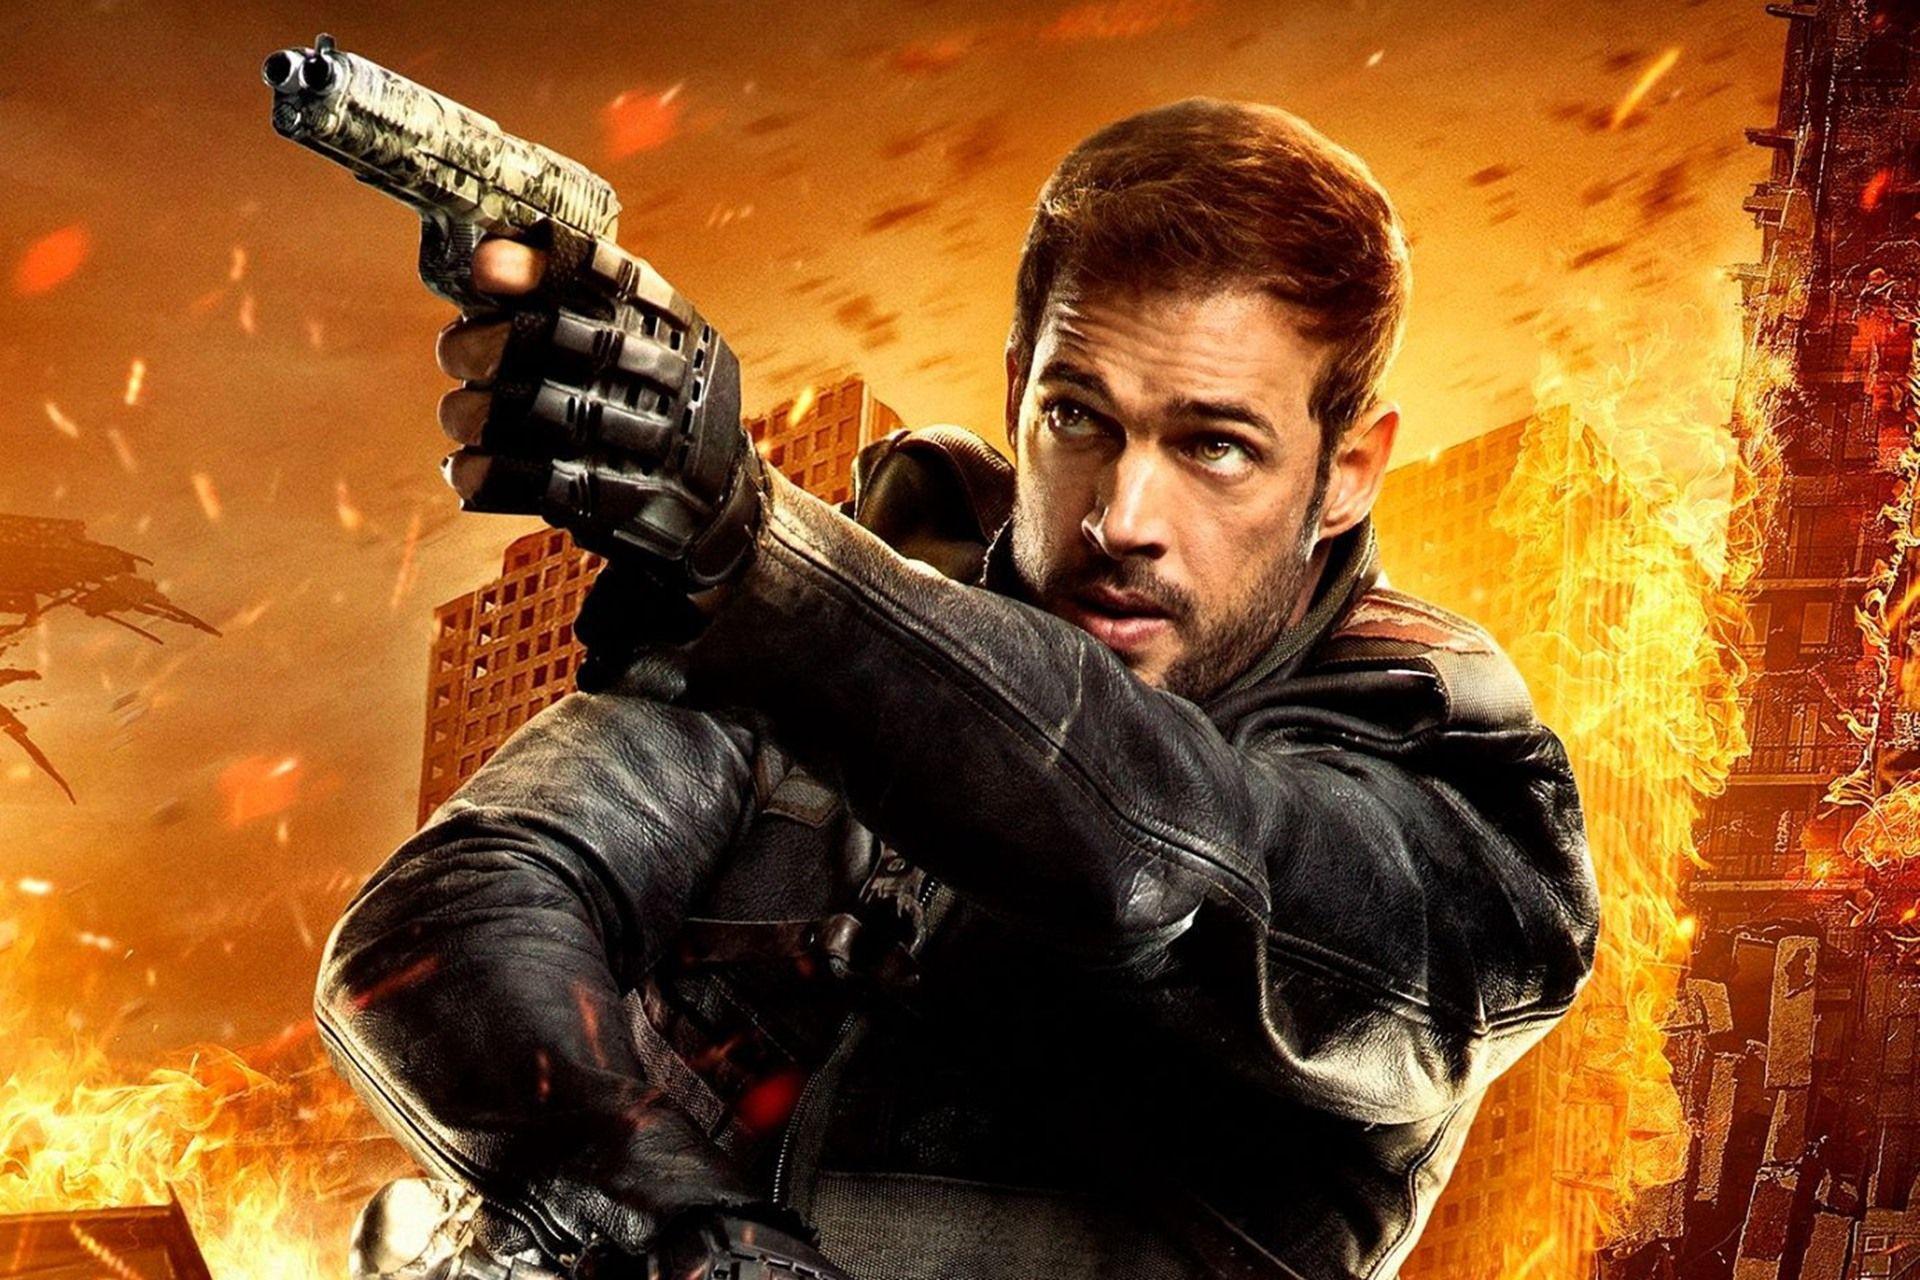 William Levy Resident Evil The Final Chapter Wallpaper 11865